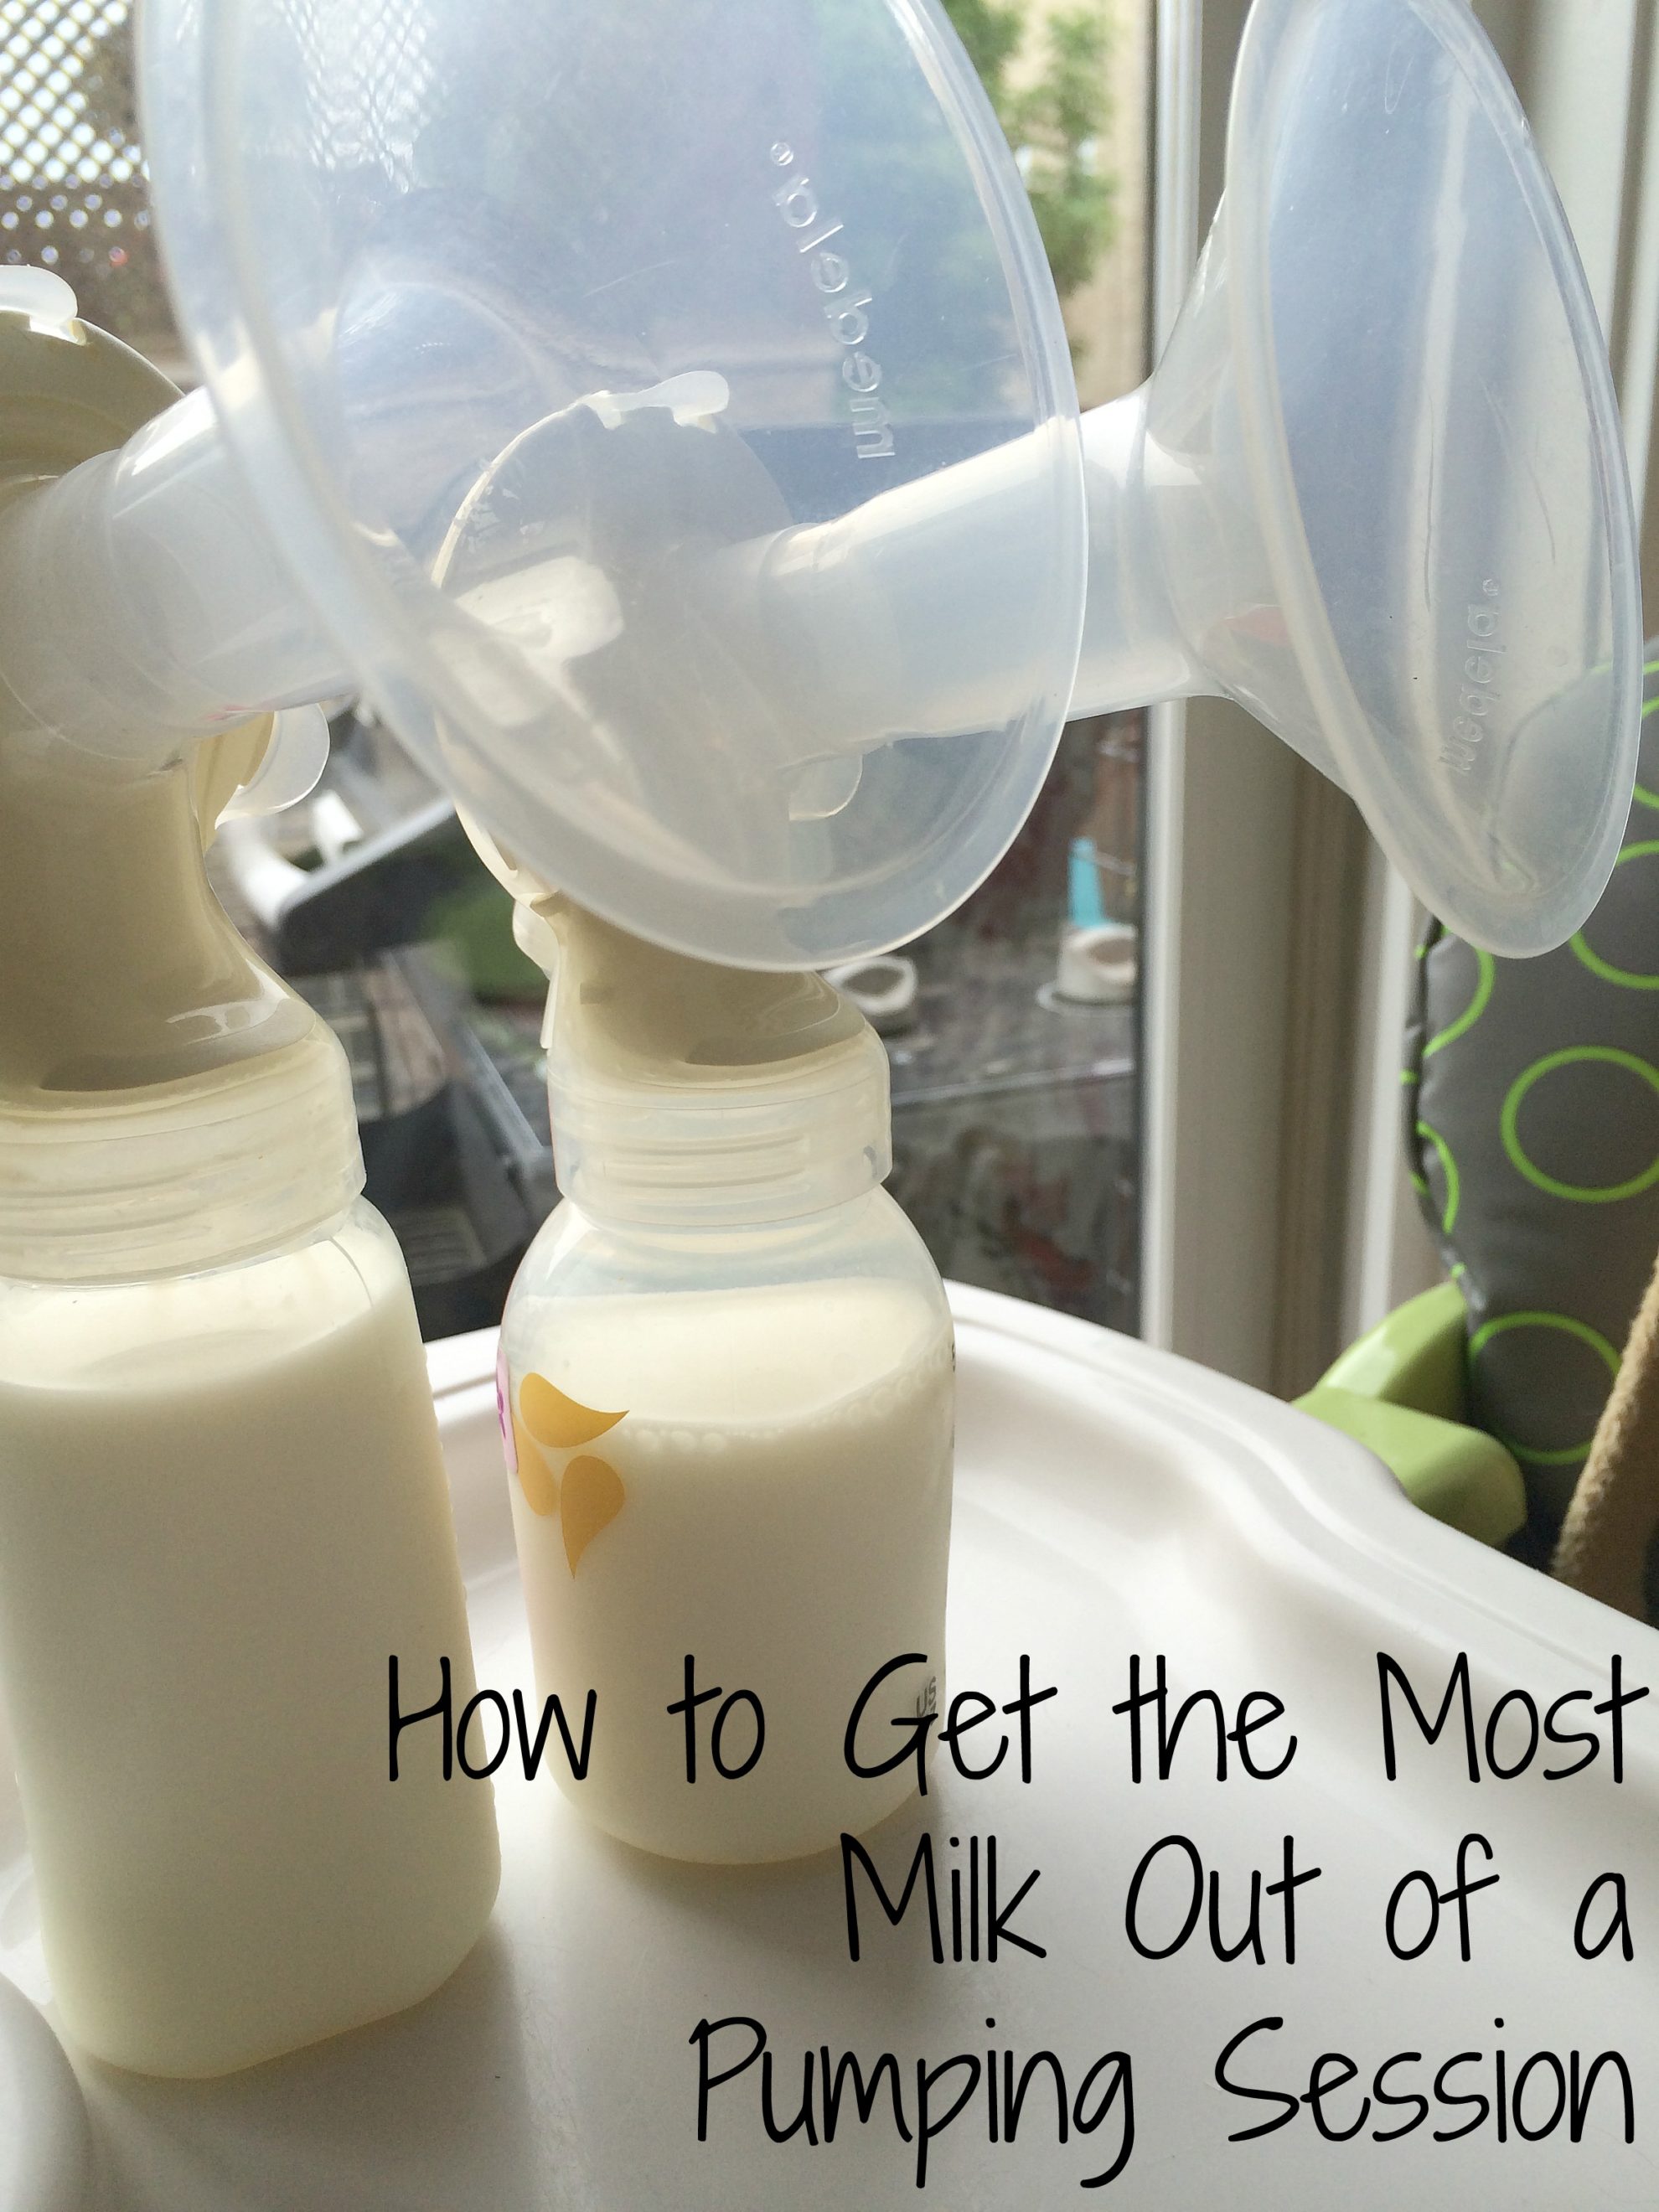 How To Get The Most Milk Out Of A Pumping Session-7965